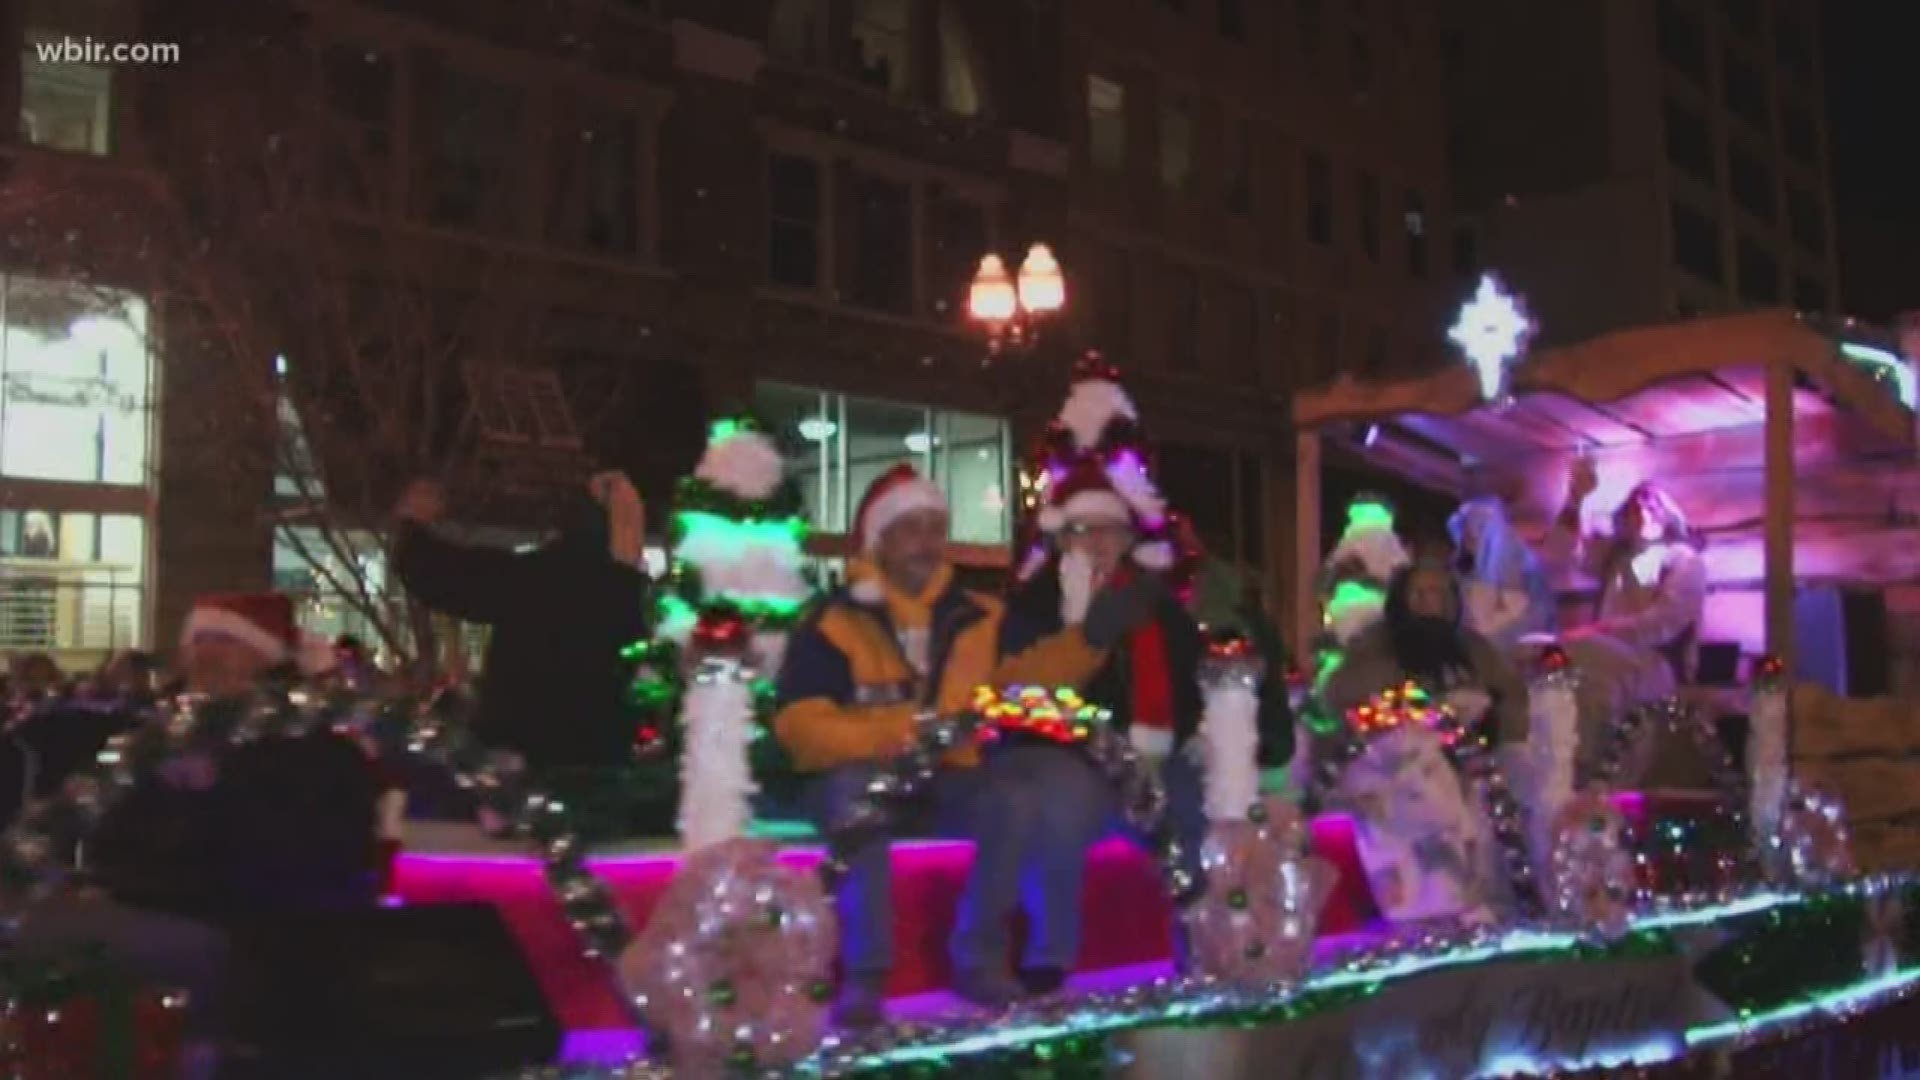 The annual Christmas parades are big traditions in each city and this year is no different.